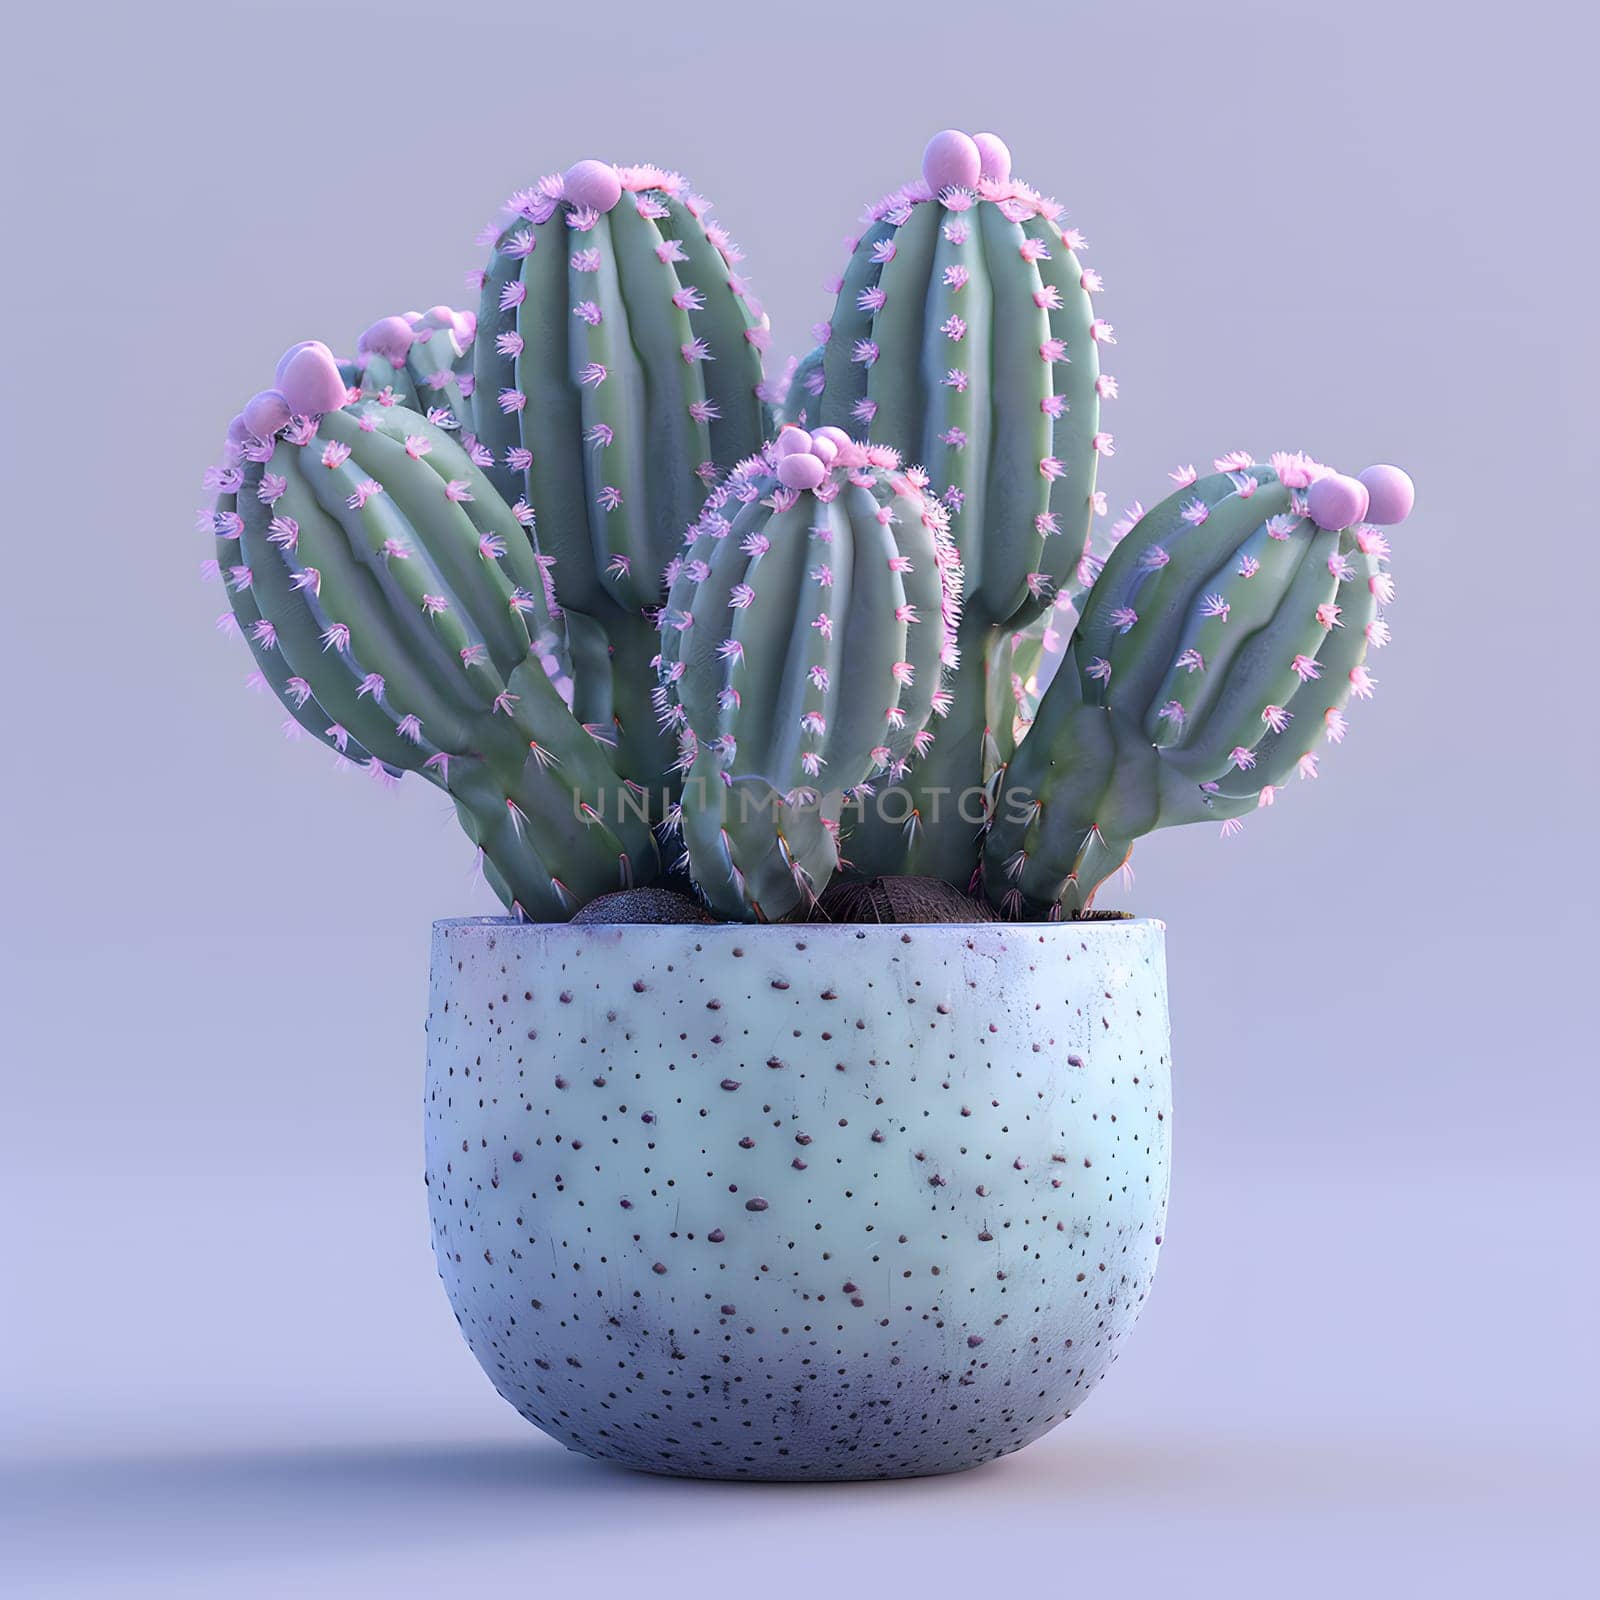 An electric blue flowerpot houses a terrestrial plant with pink flowers, resembling a cactus. This houseplant adds a pop of color to any landscape